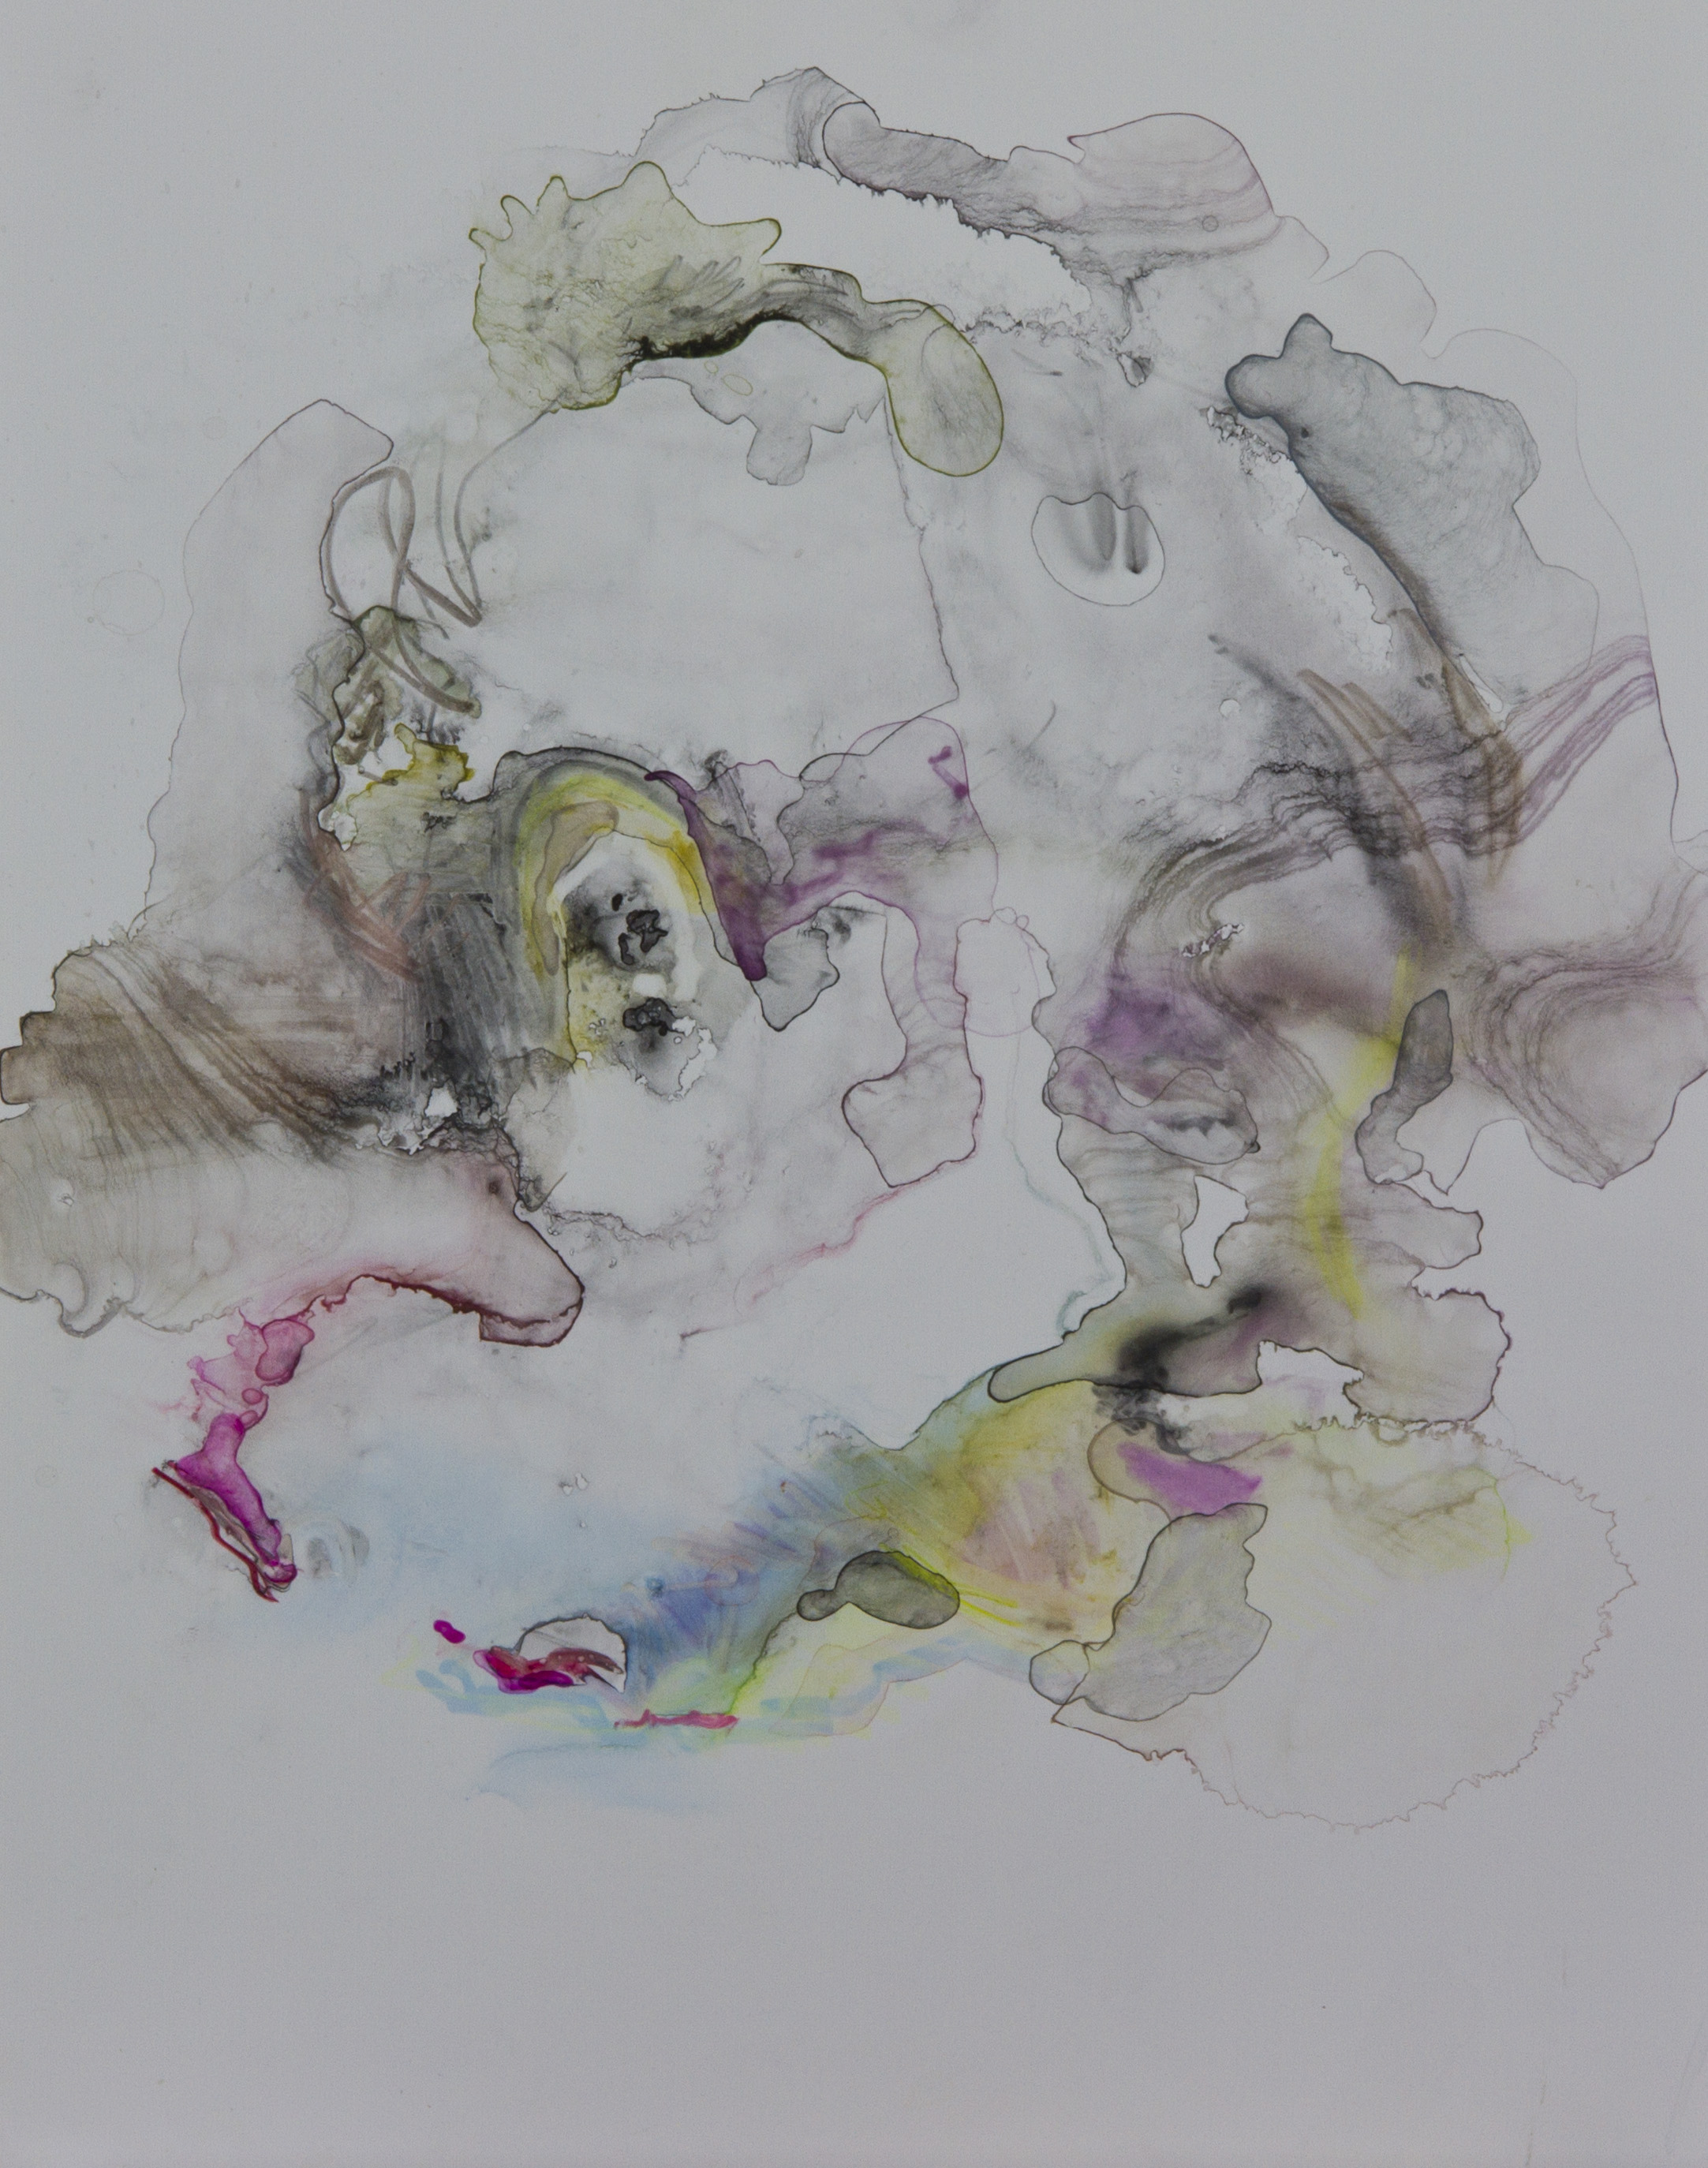 Specimen 8, 2011, watercolor on polypropylene, 11x14 inches